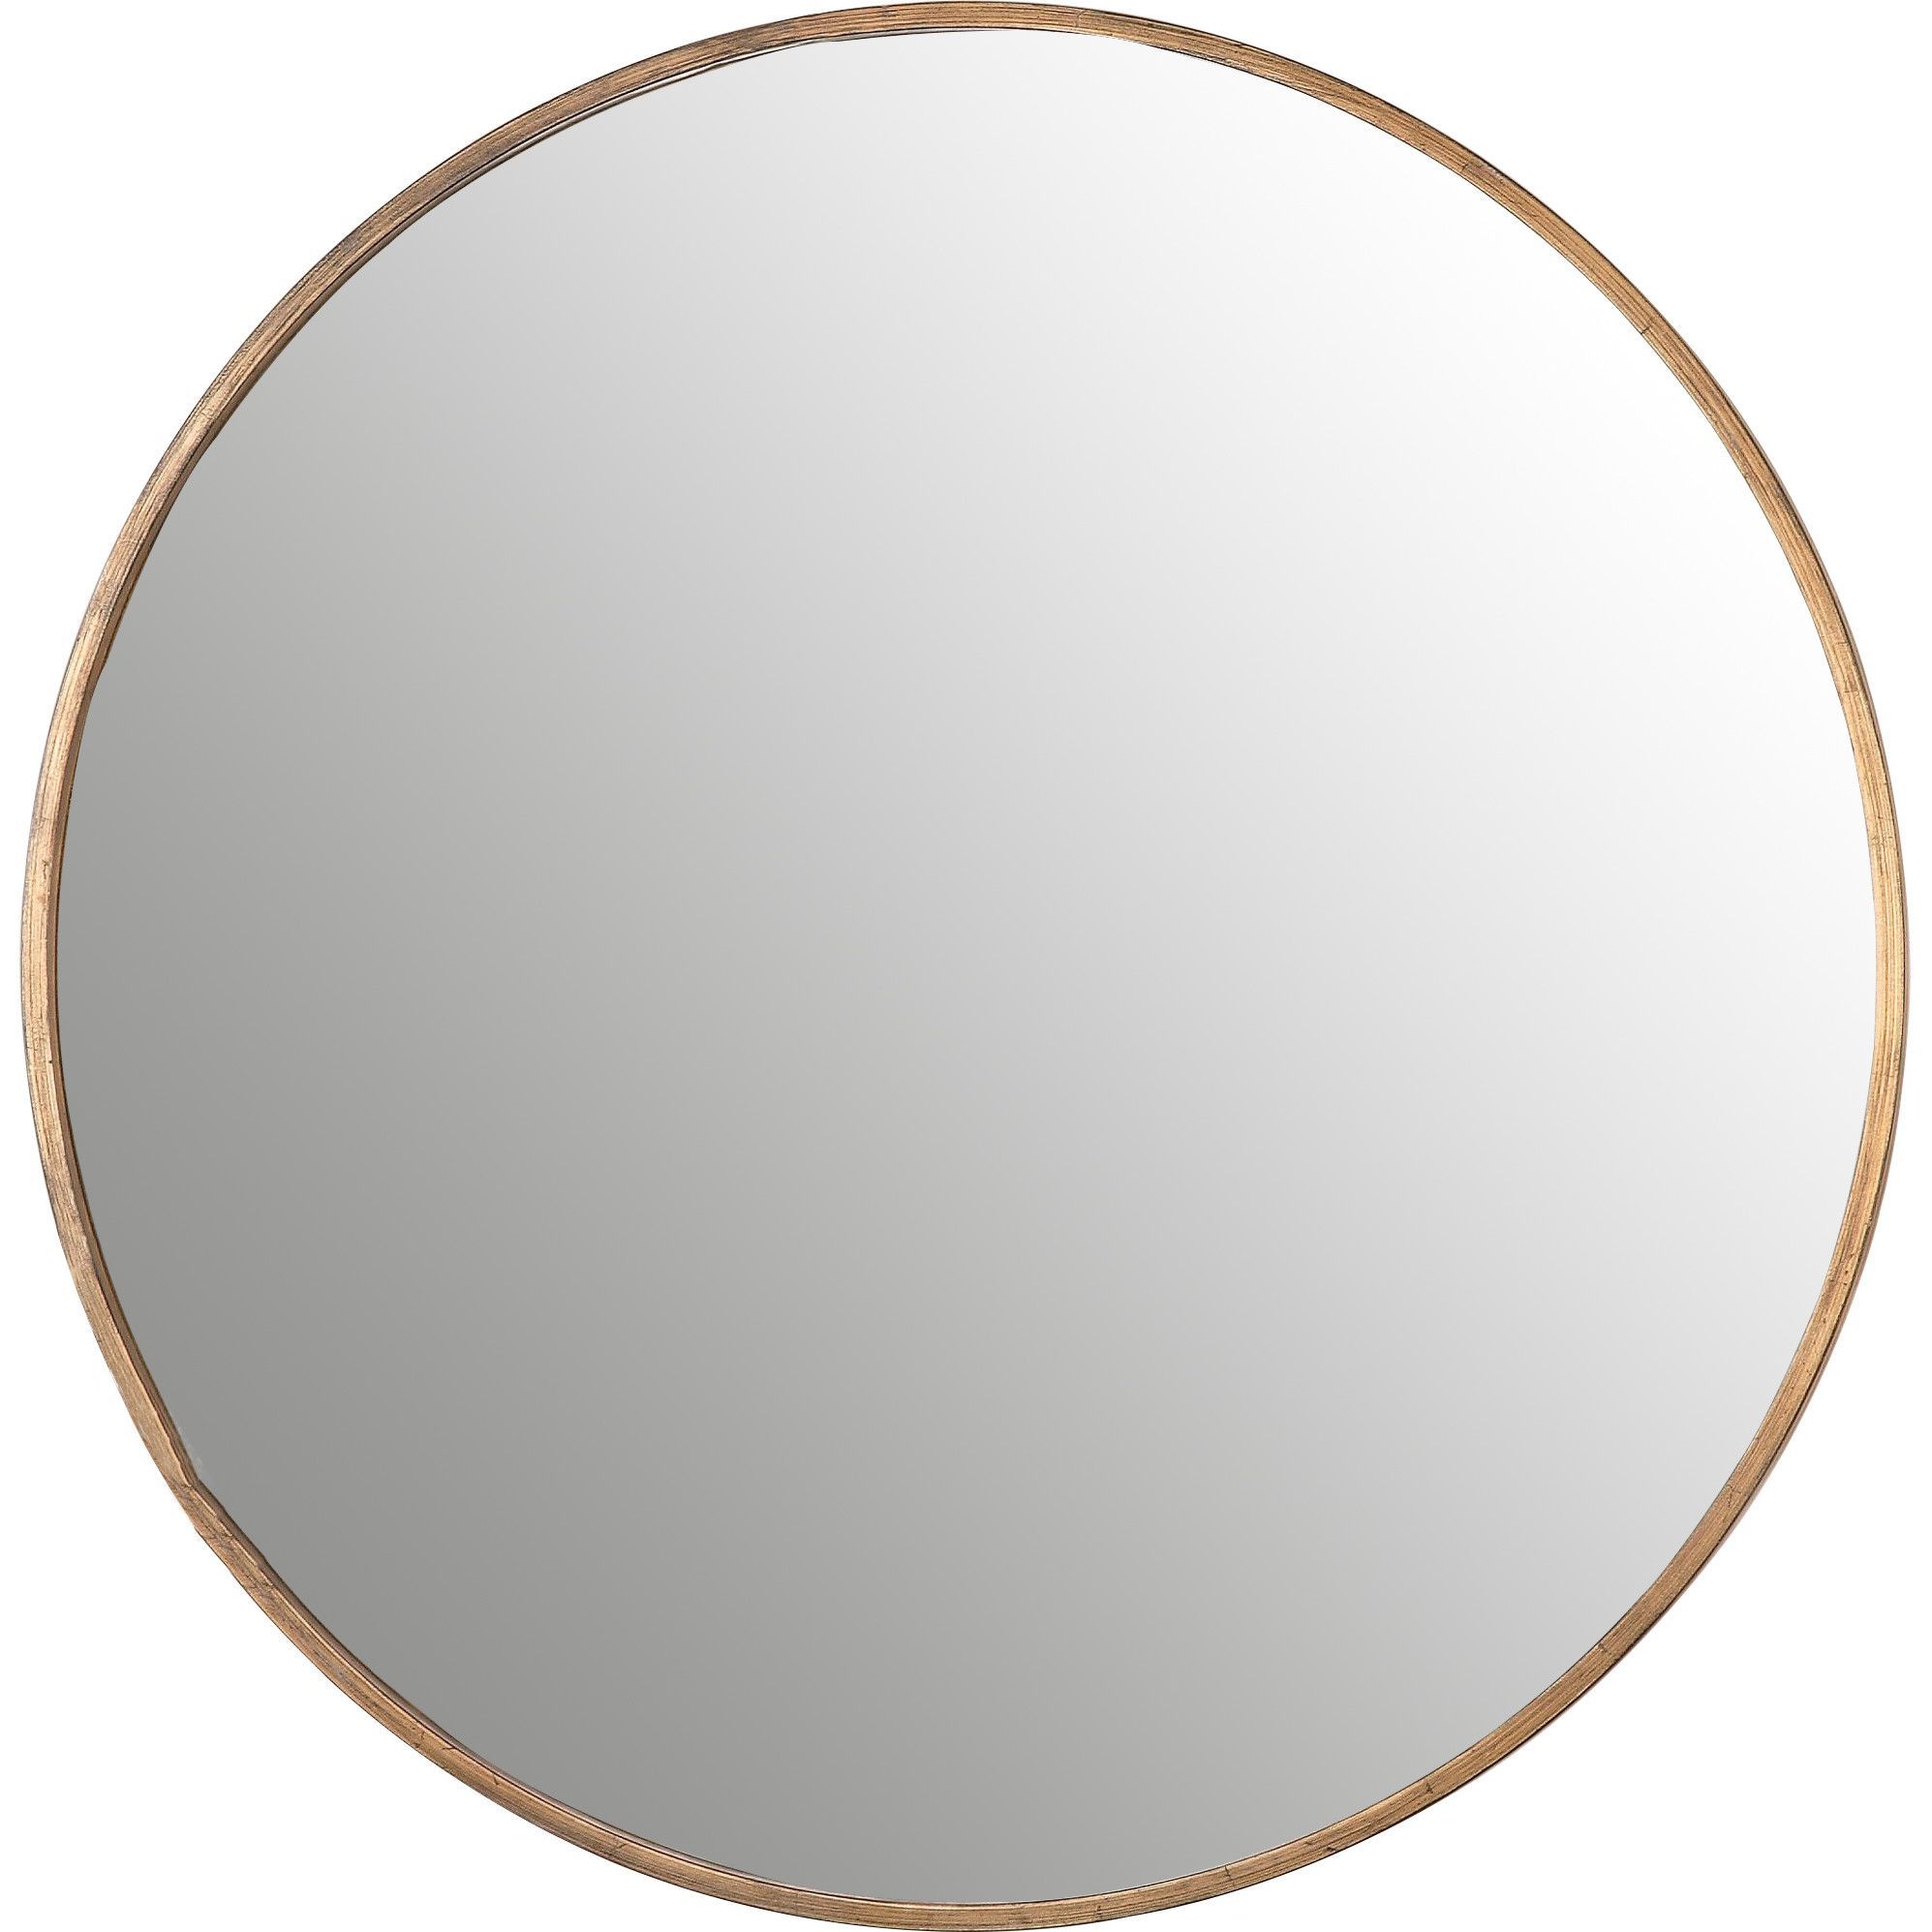 Corrigan Studio Round Mirror In 2020 | Round Mirrors, Large Round Intended For Kayden Accent Mirrors (View 9 of 15)